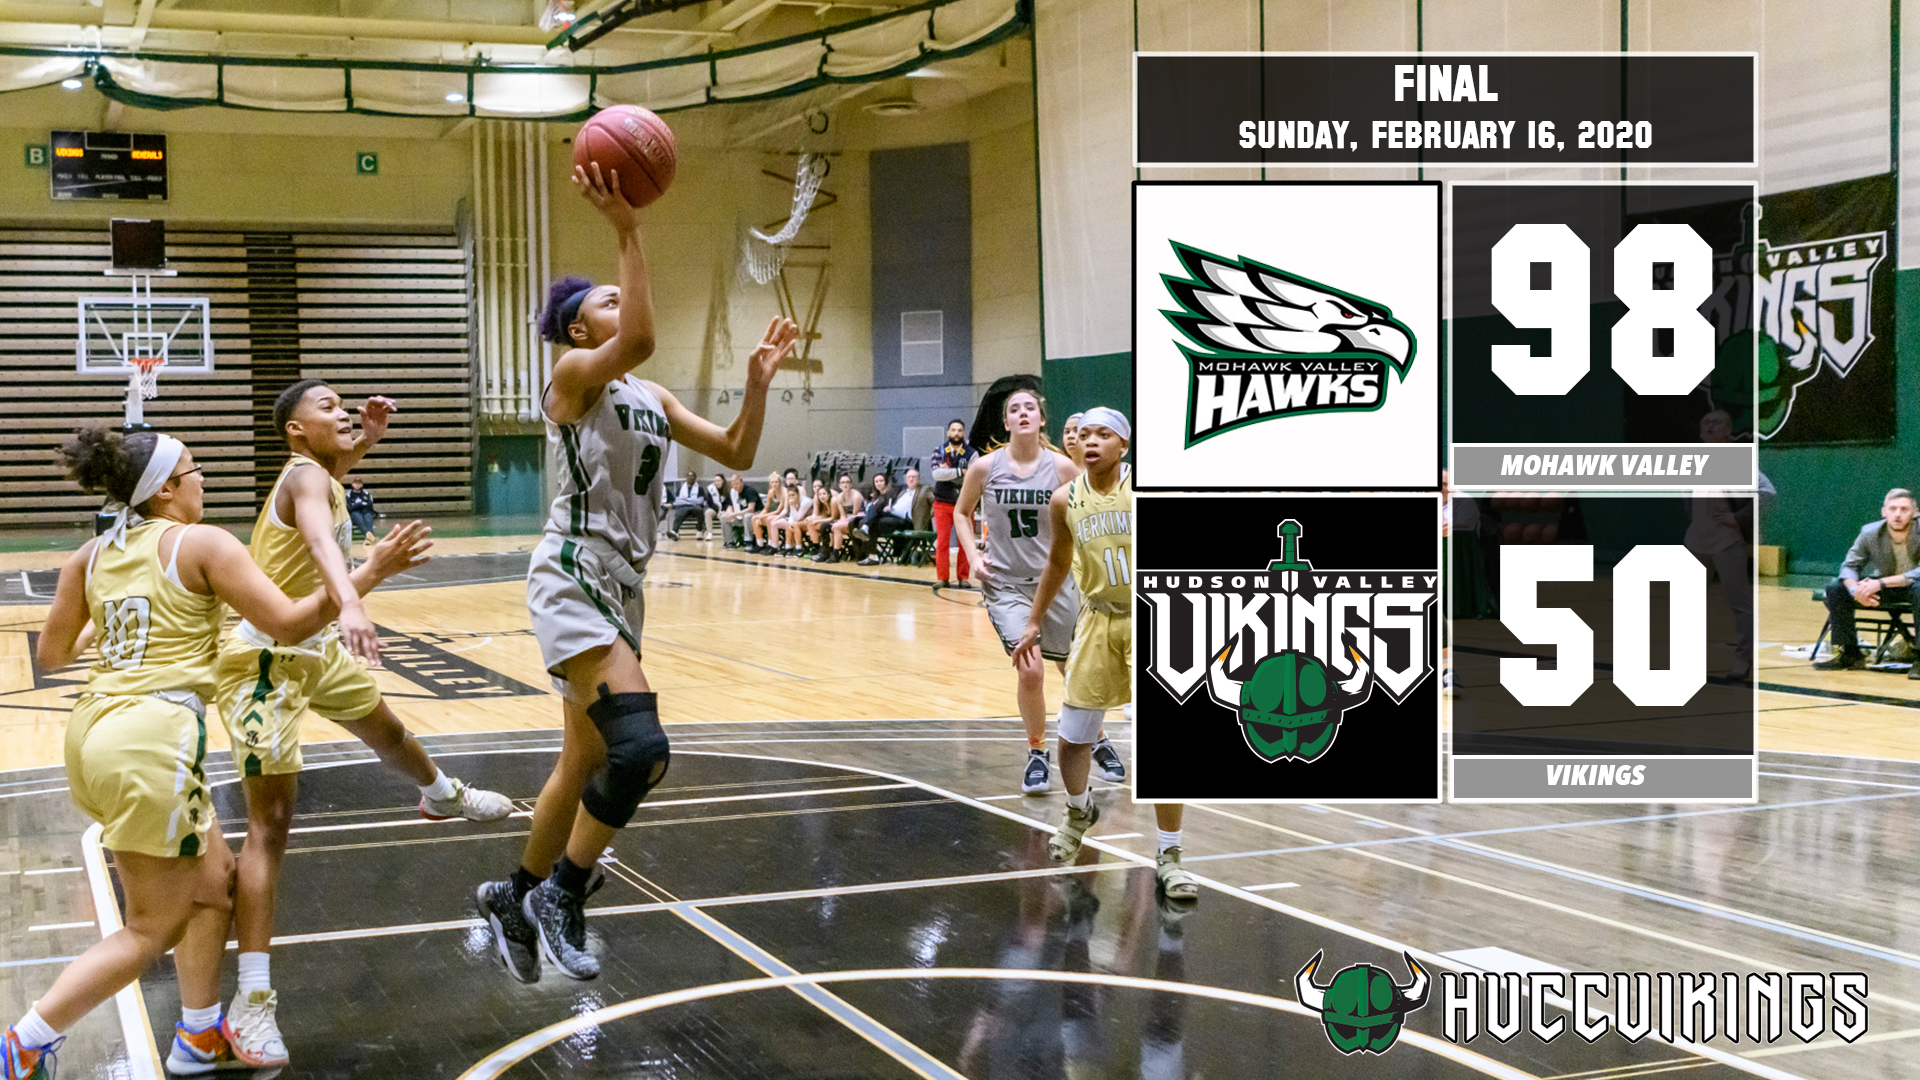 Women's basketball defeated by Mohawk Valley 98-50 on Feb. 16, 2020.